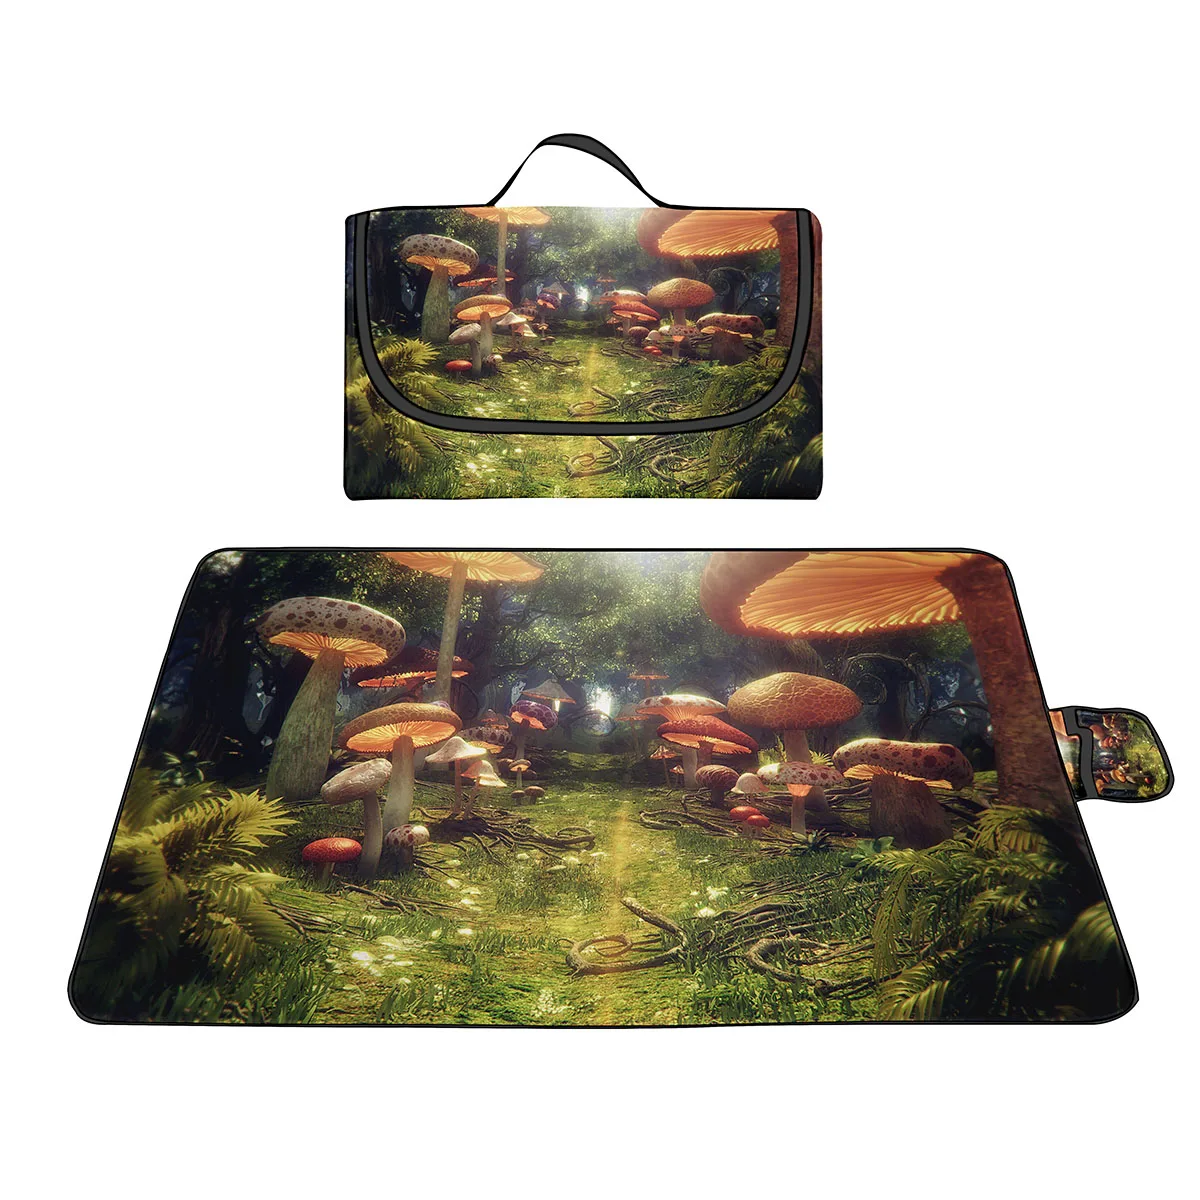 

Psychedelic Mushrooms Outdoor Sandproof & Waterproof Picnic Blankets,Beach Blanket Mat,Durable Rug for Camping,Hiking,Travelling